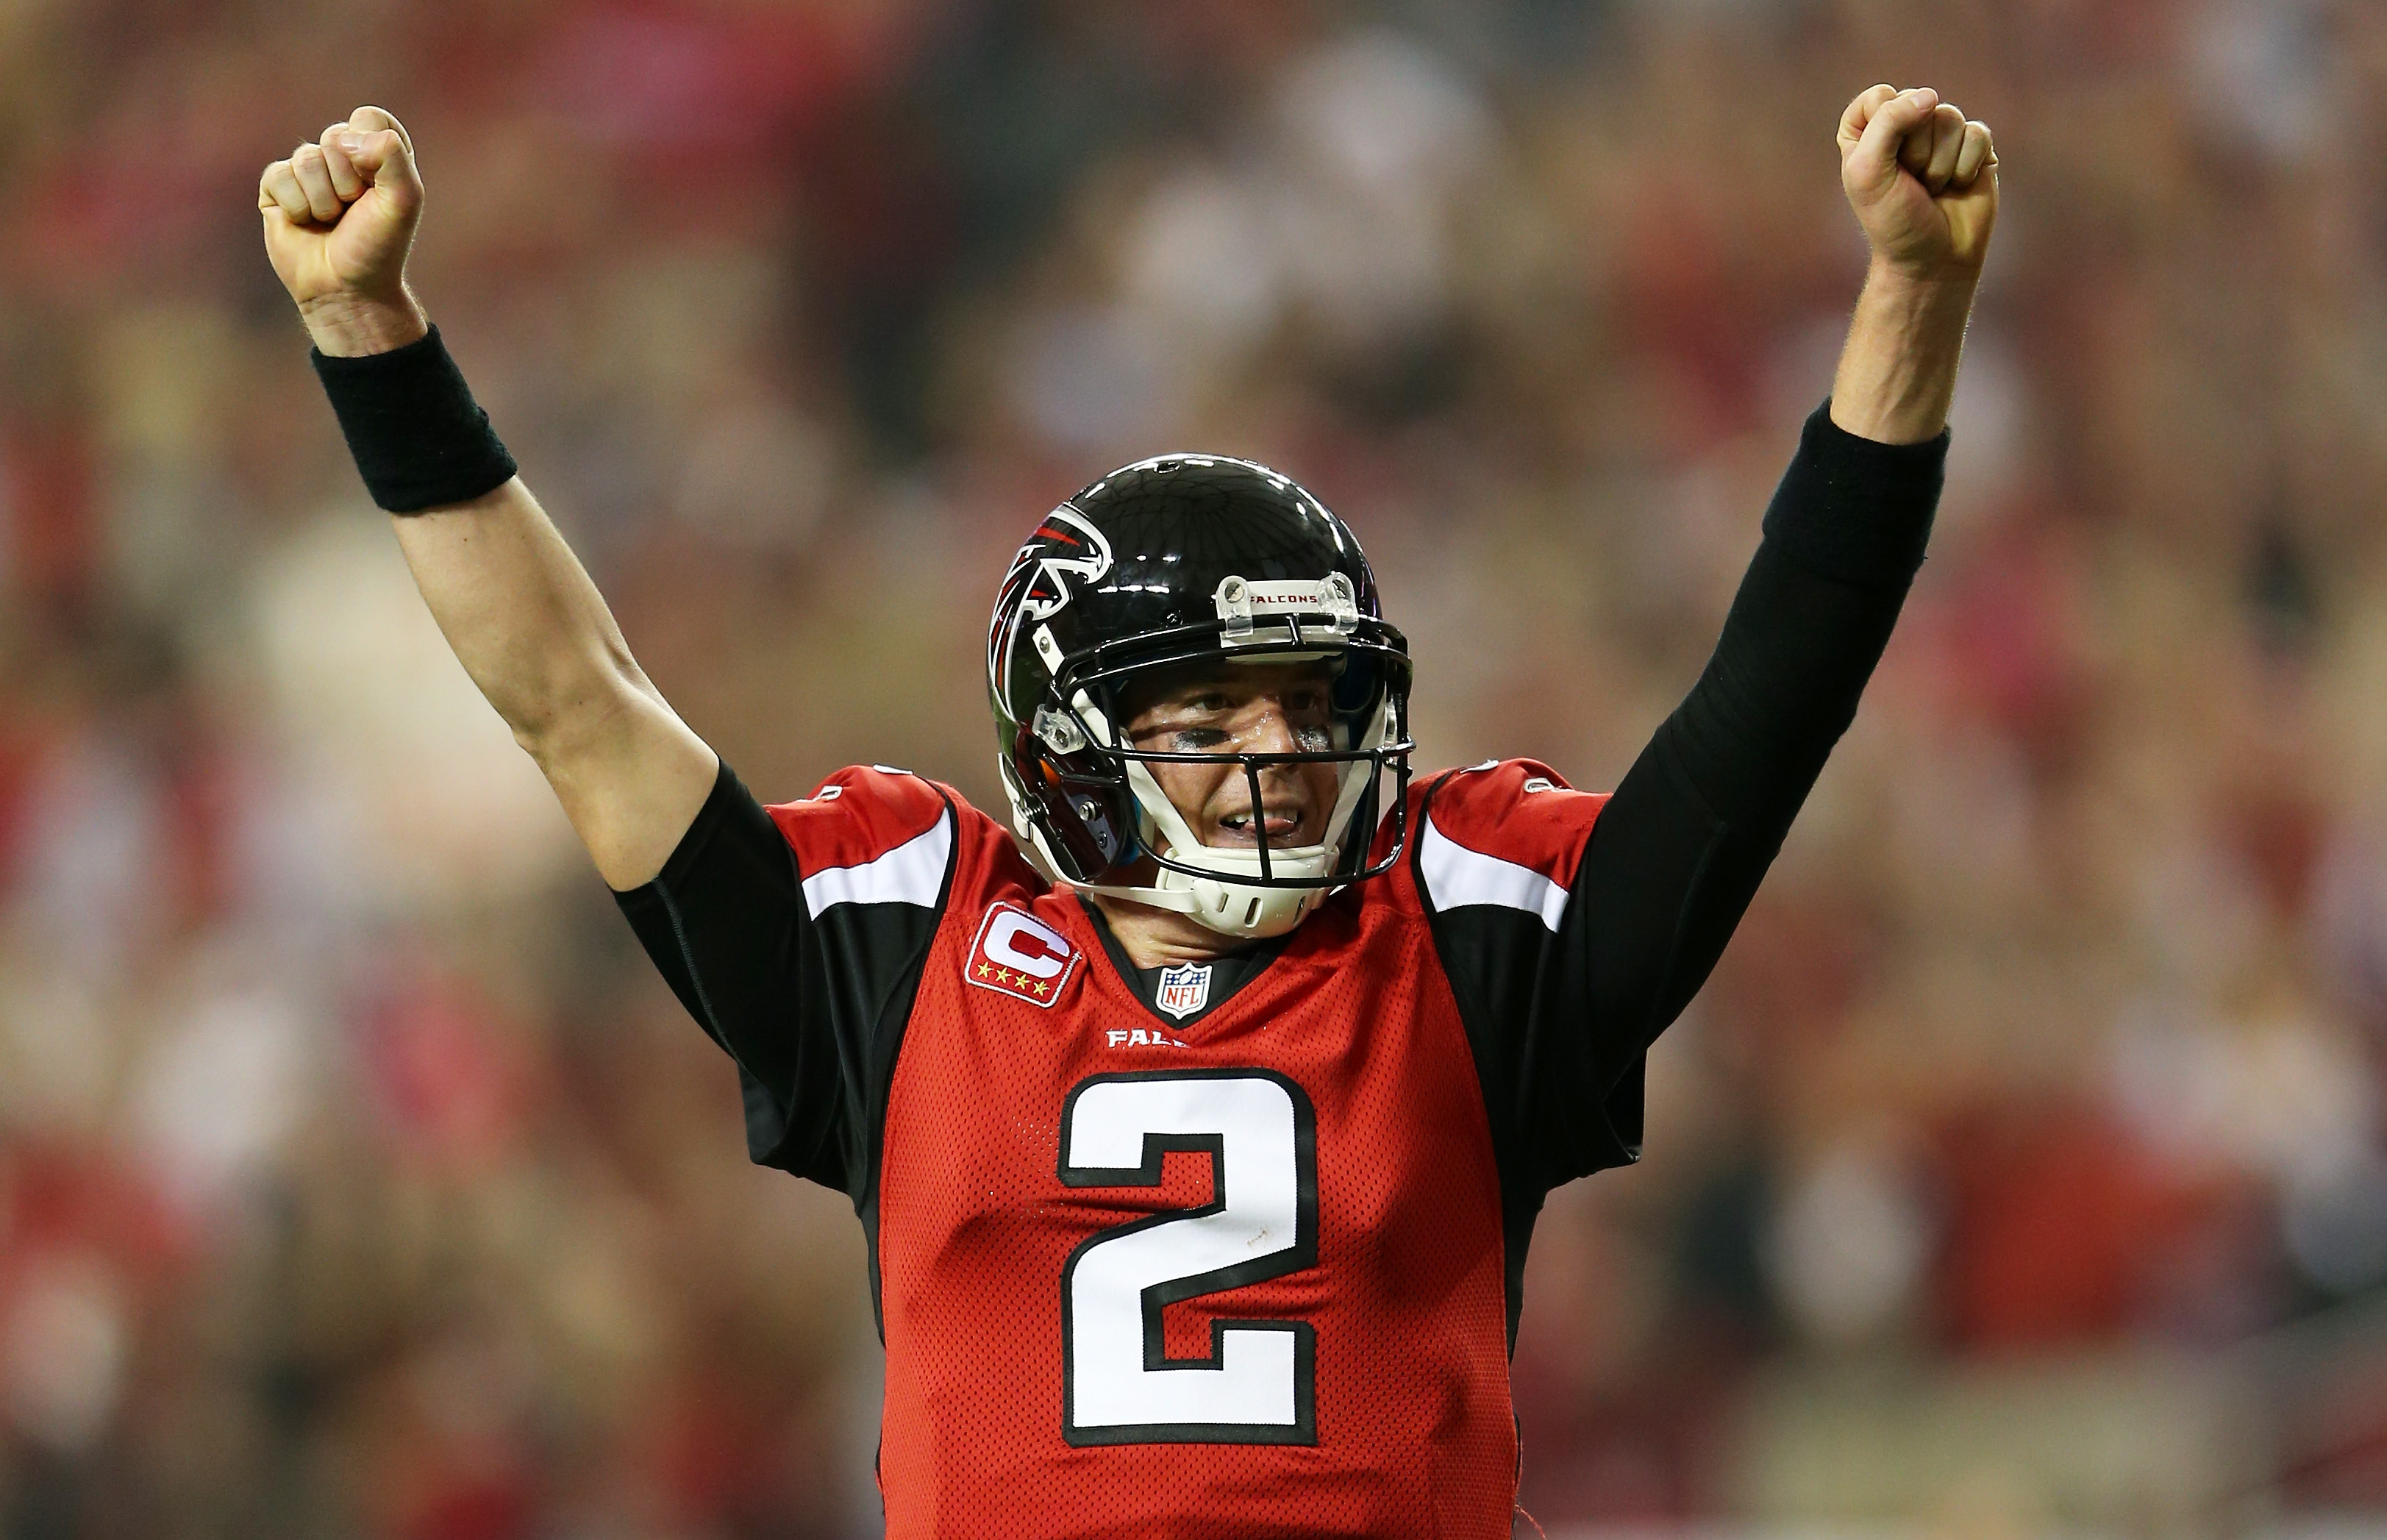 Matt Ryan celebrates a third quarter touchdown pass against the Seattle Seahawks during the NFC Divisional Playoff Game at Georgia Dome in 2013. (Photo by Mike Ehrmann/Getty Images)